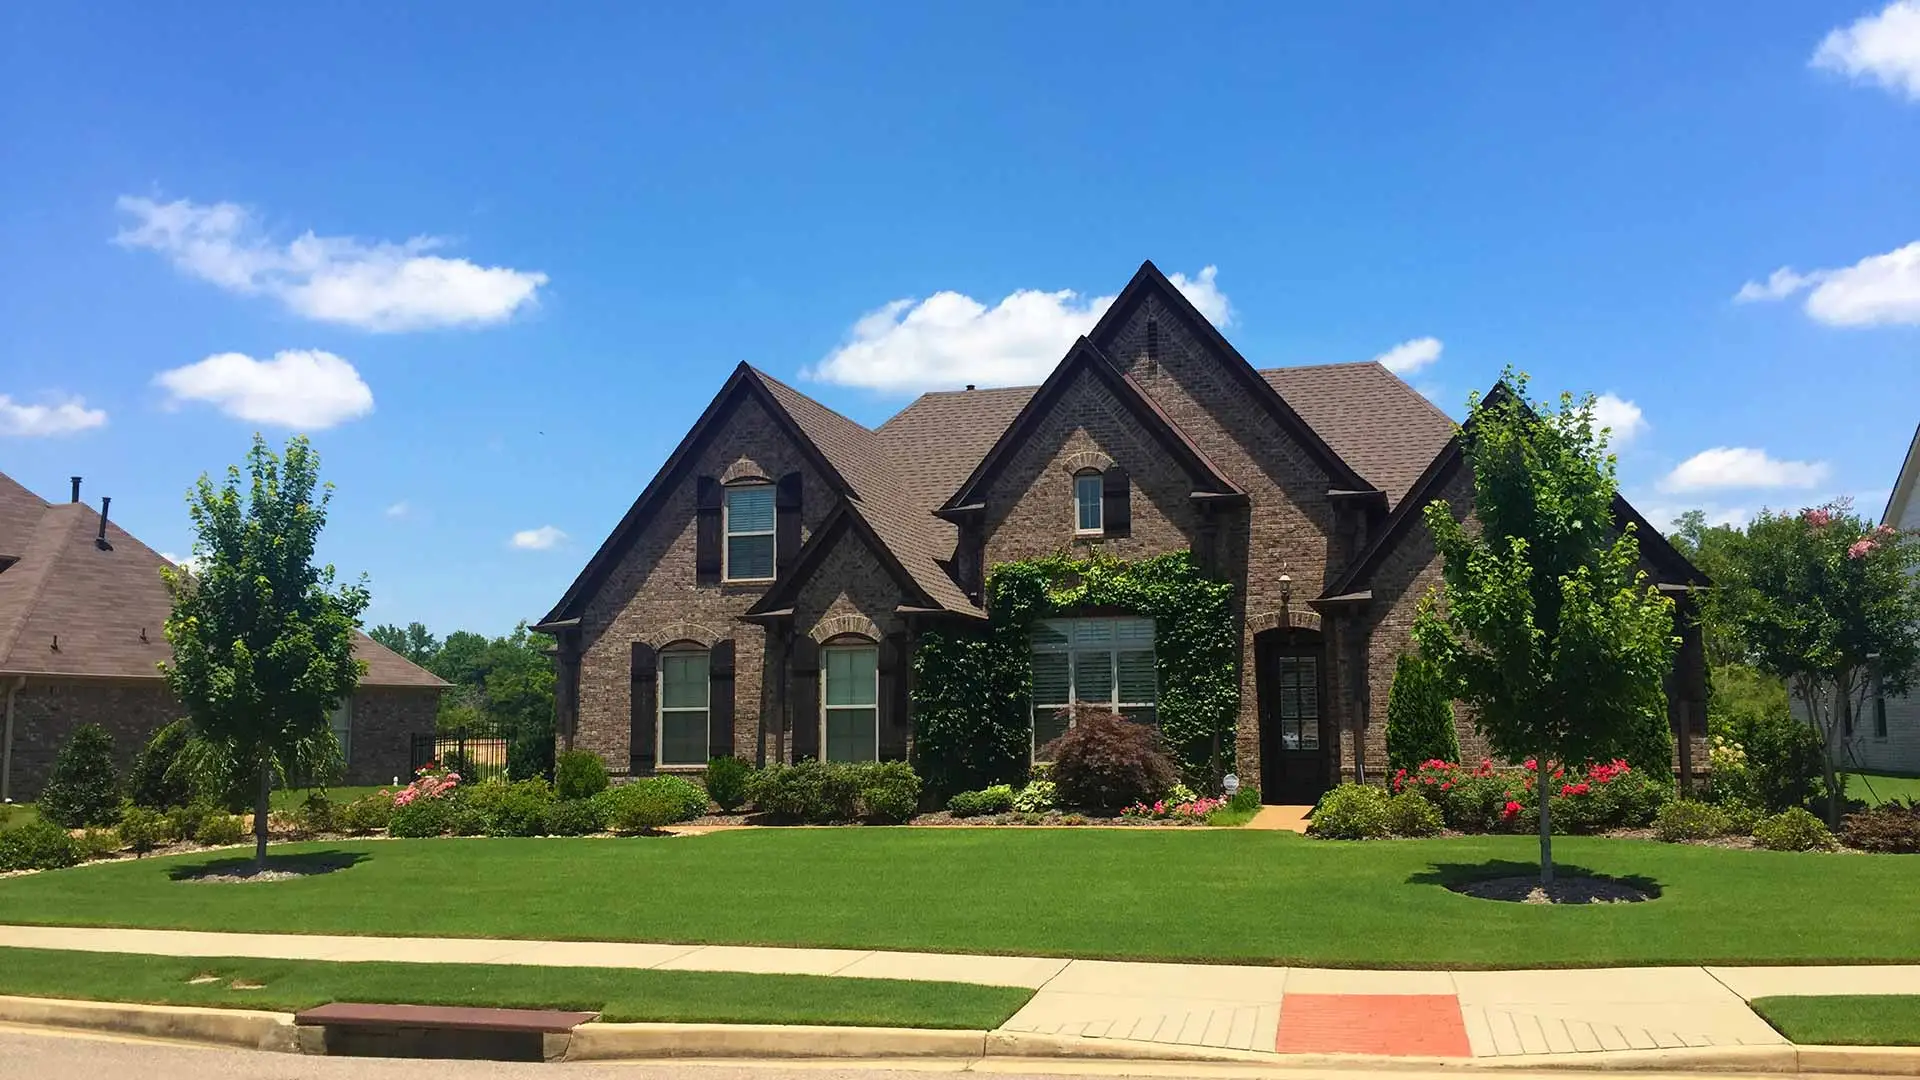 Lakeland, TN property with regular lawn and landscape maintenance.